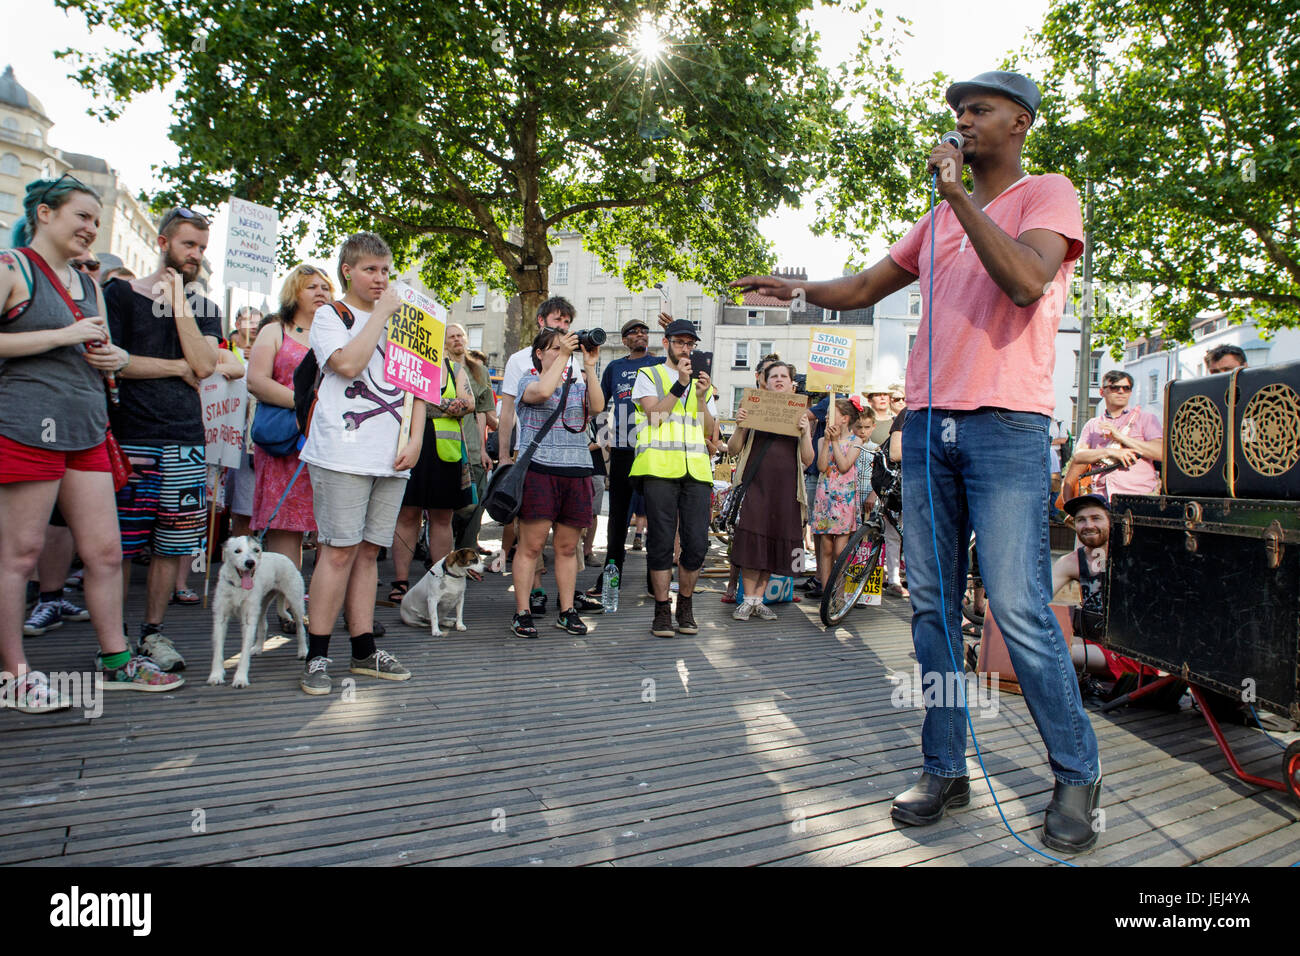 Anti-racist campaigner Kamal Mohamed is pictured speaking to protesters before a Austerity kills, Justice for Grenfell protest march in Bristol Stock Photo